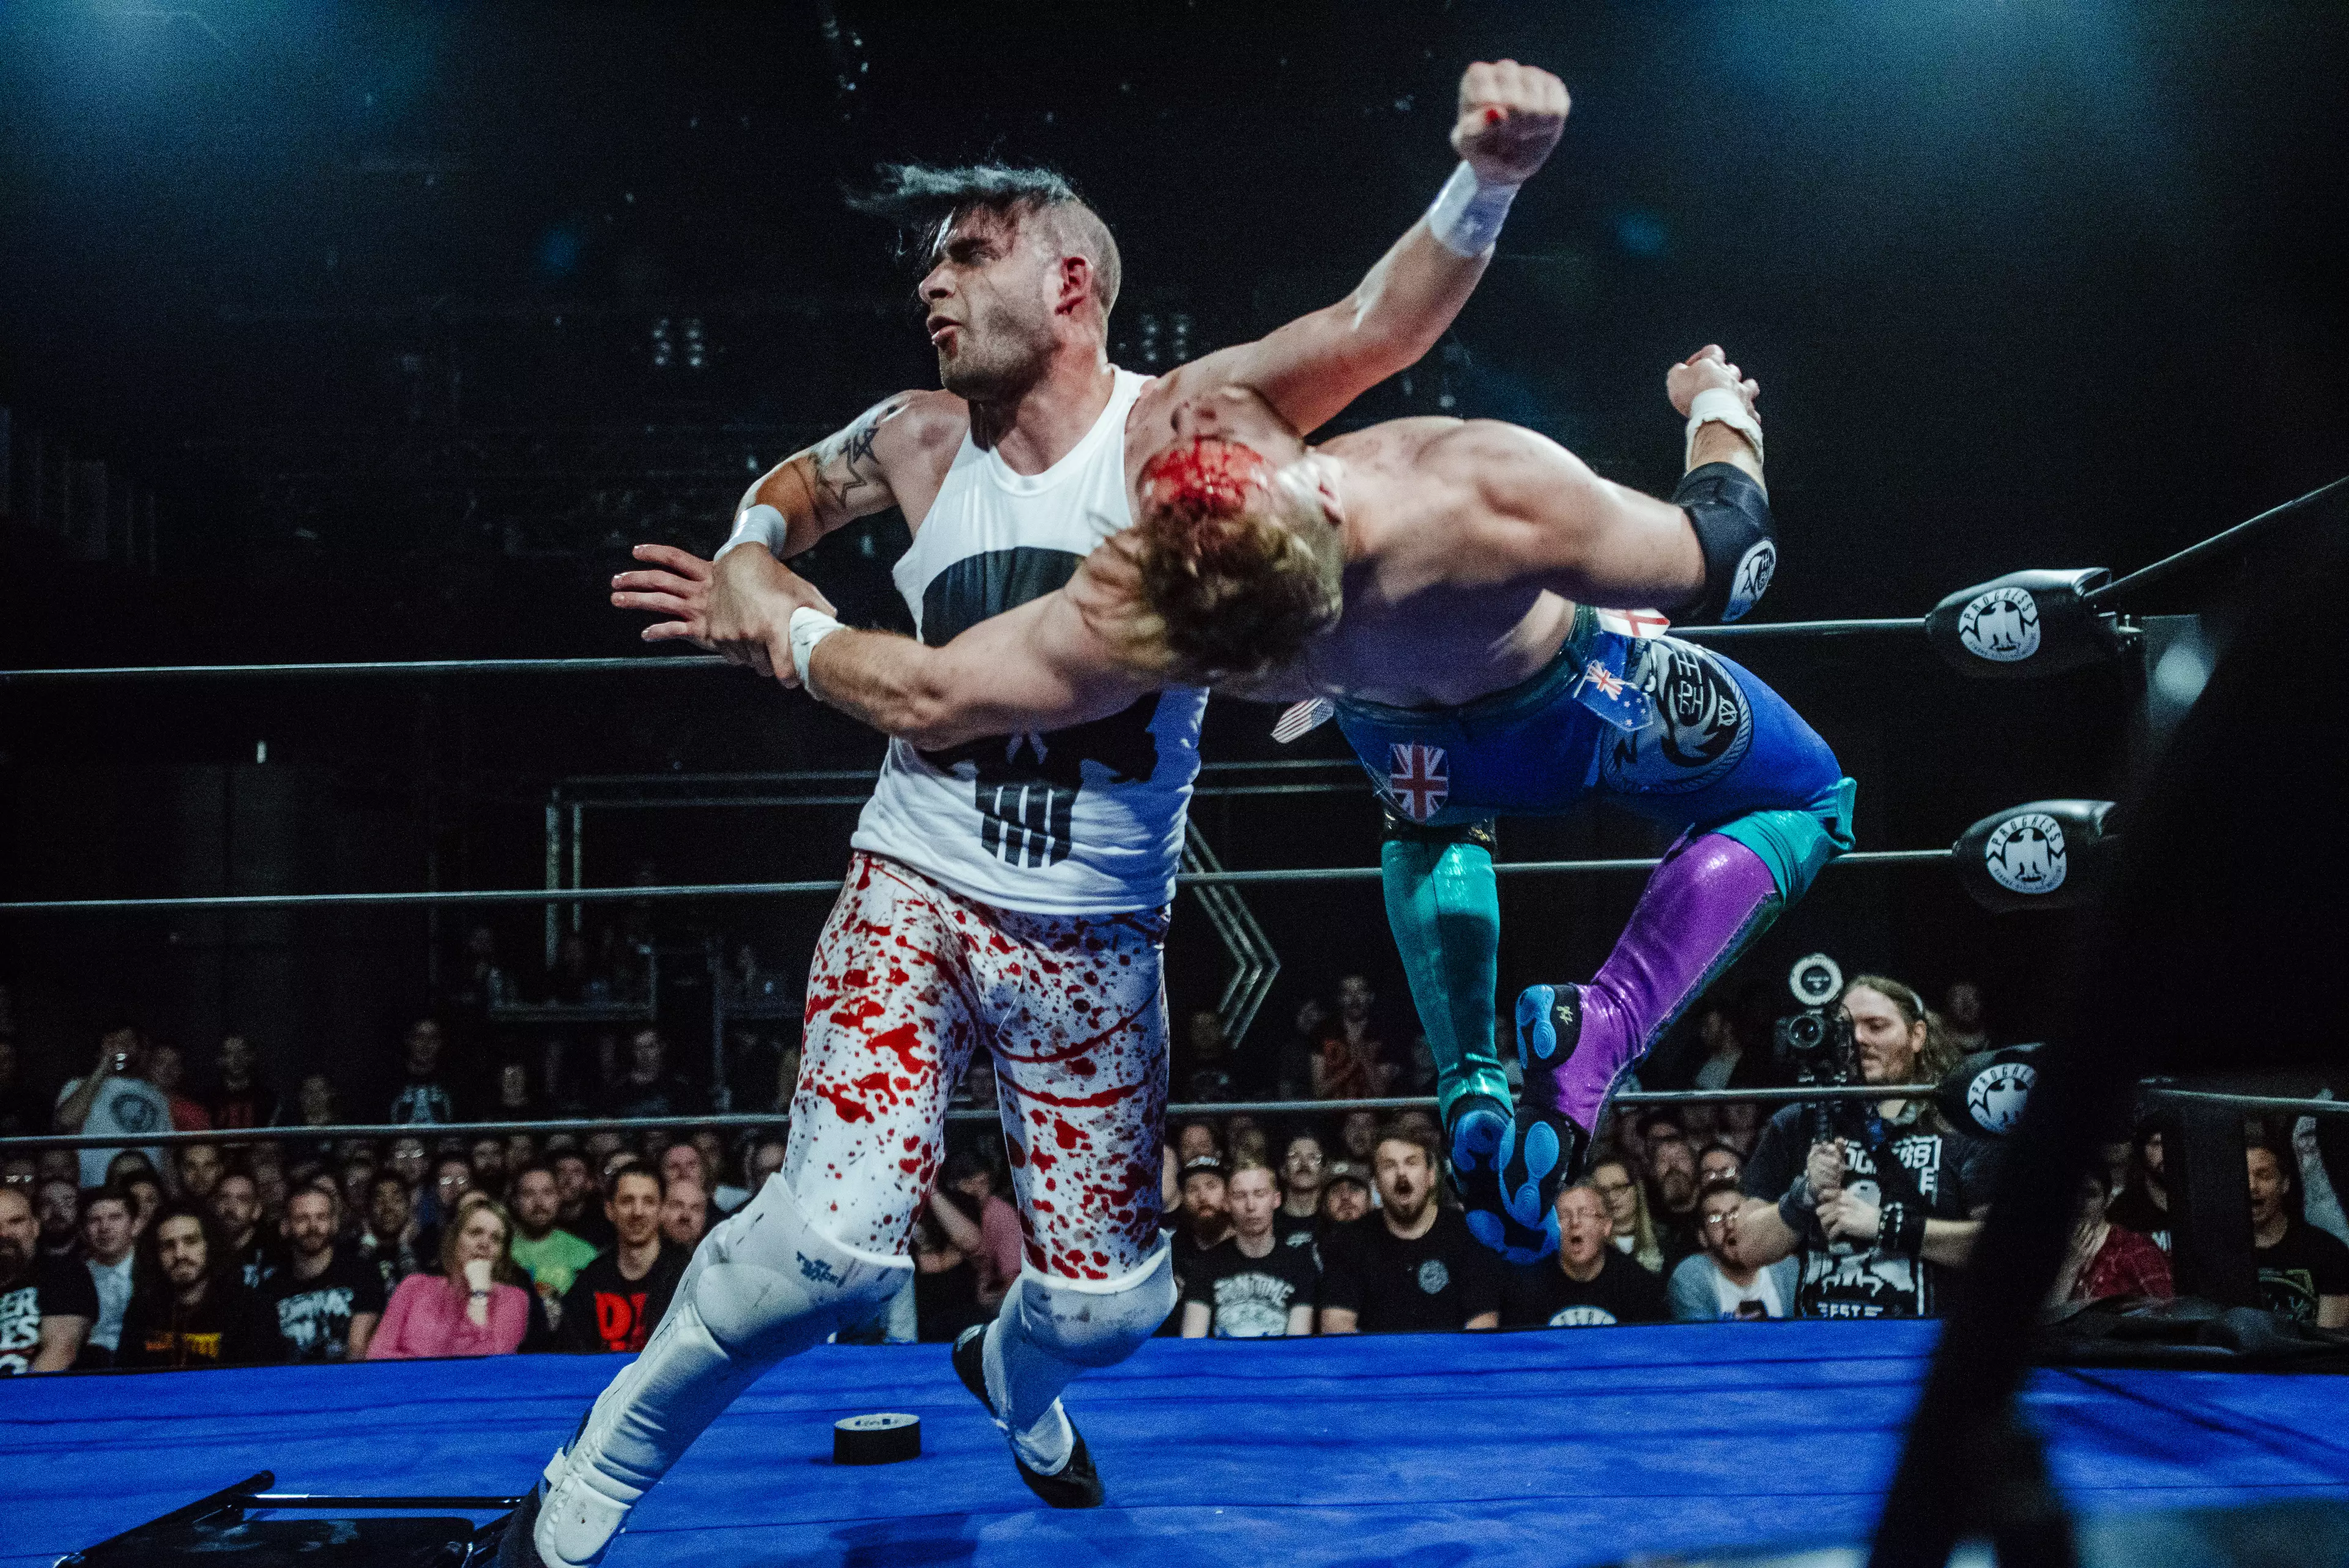 Havoc and Ospreay go at it during their 2 out of 3 falls at the recent Camden show. Image: The Head Drop